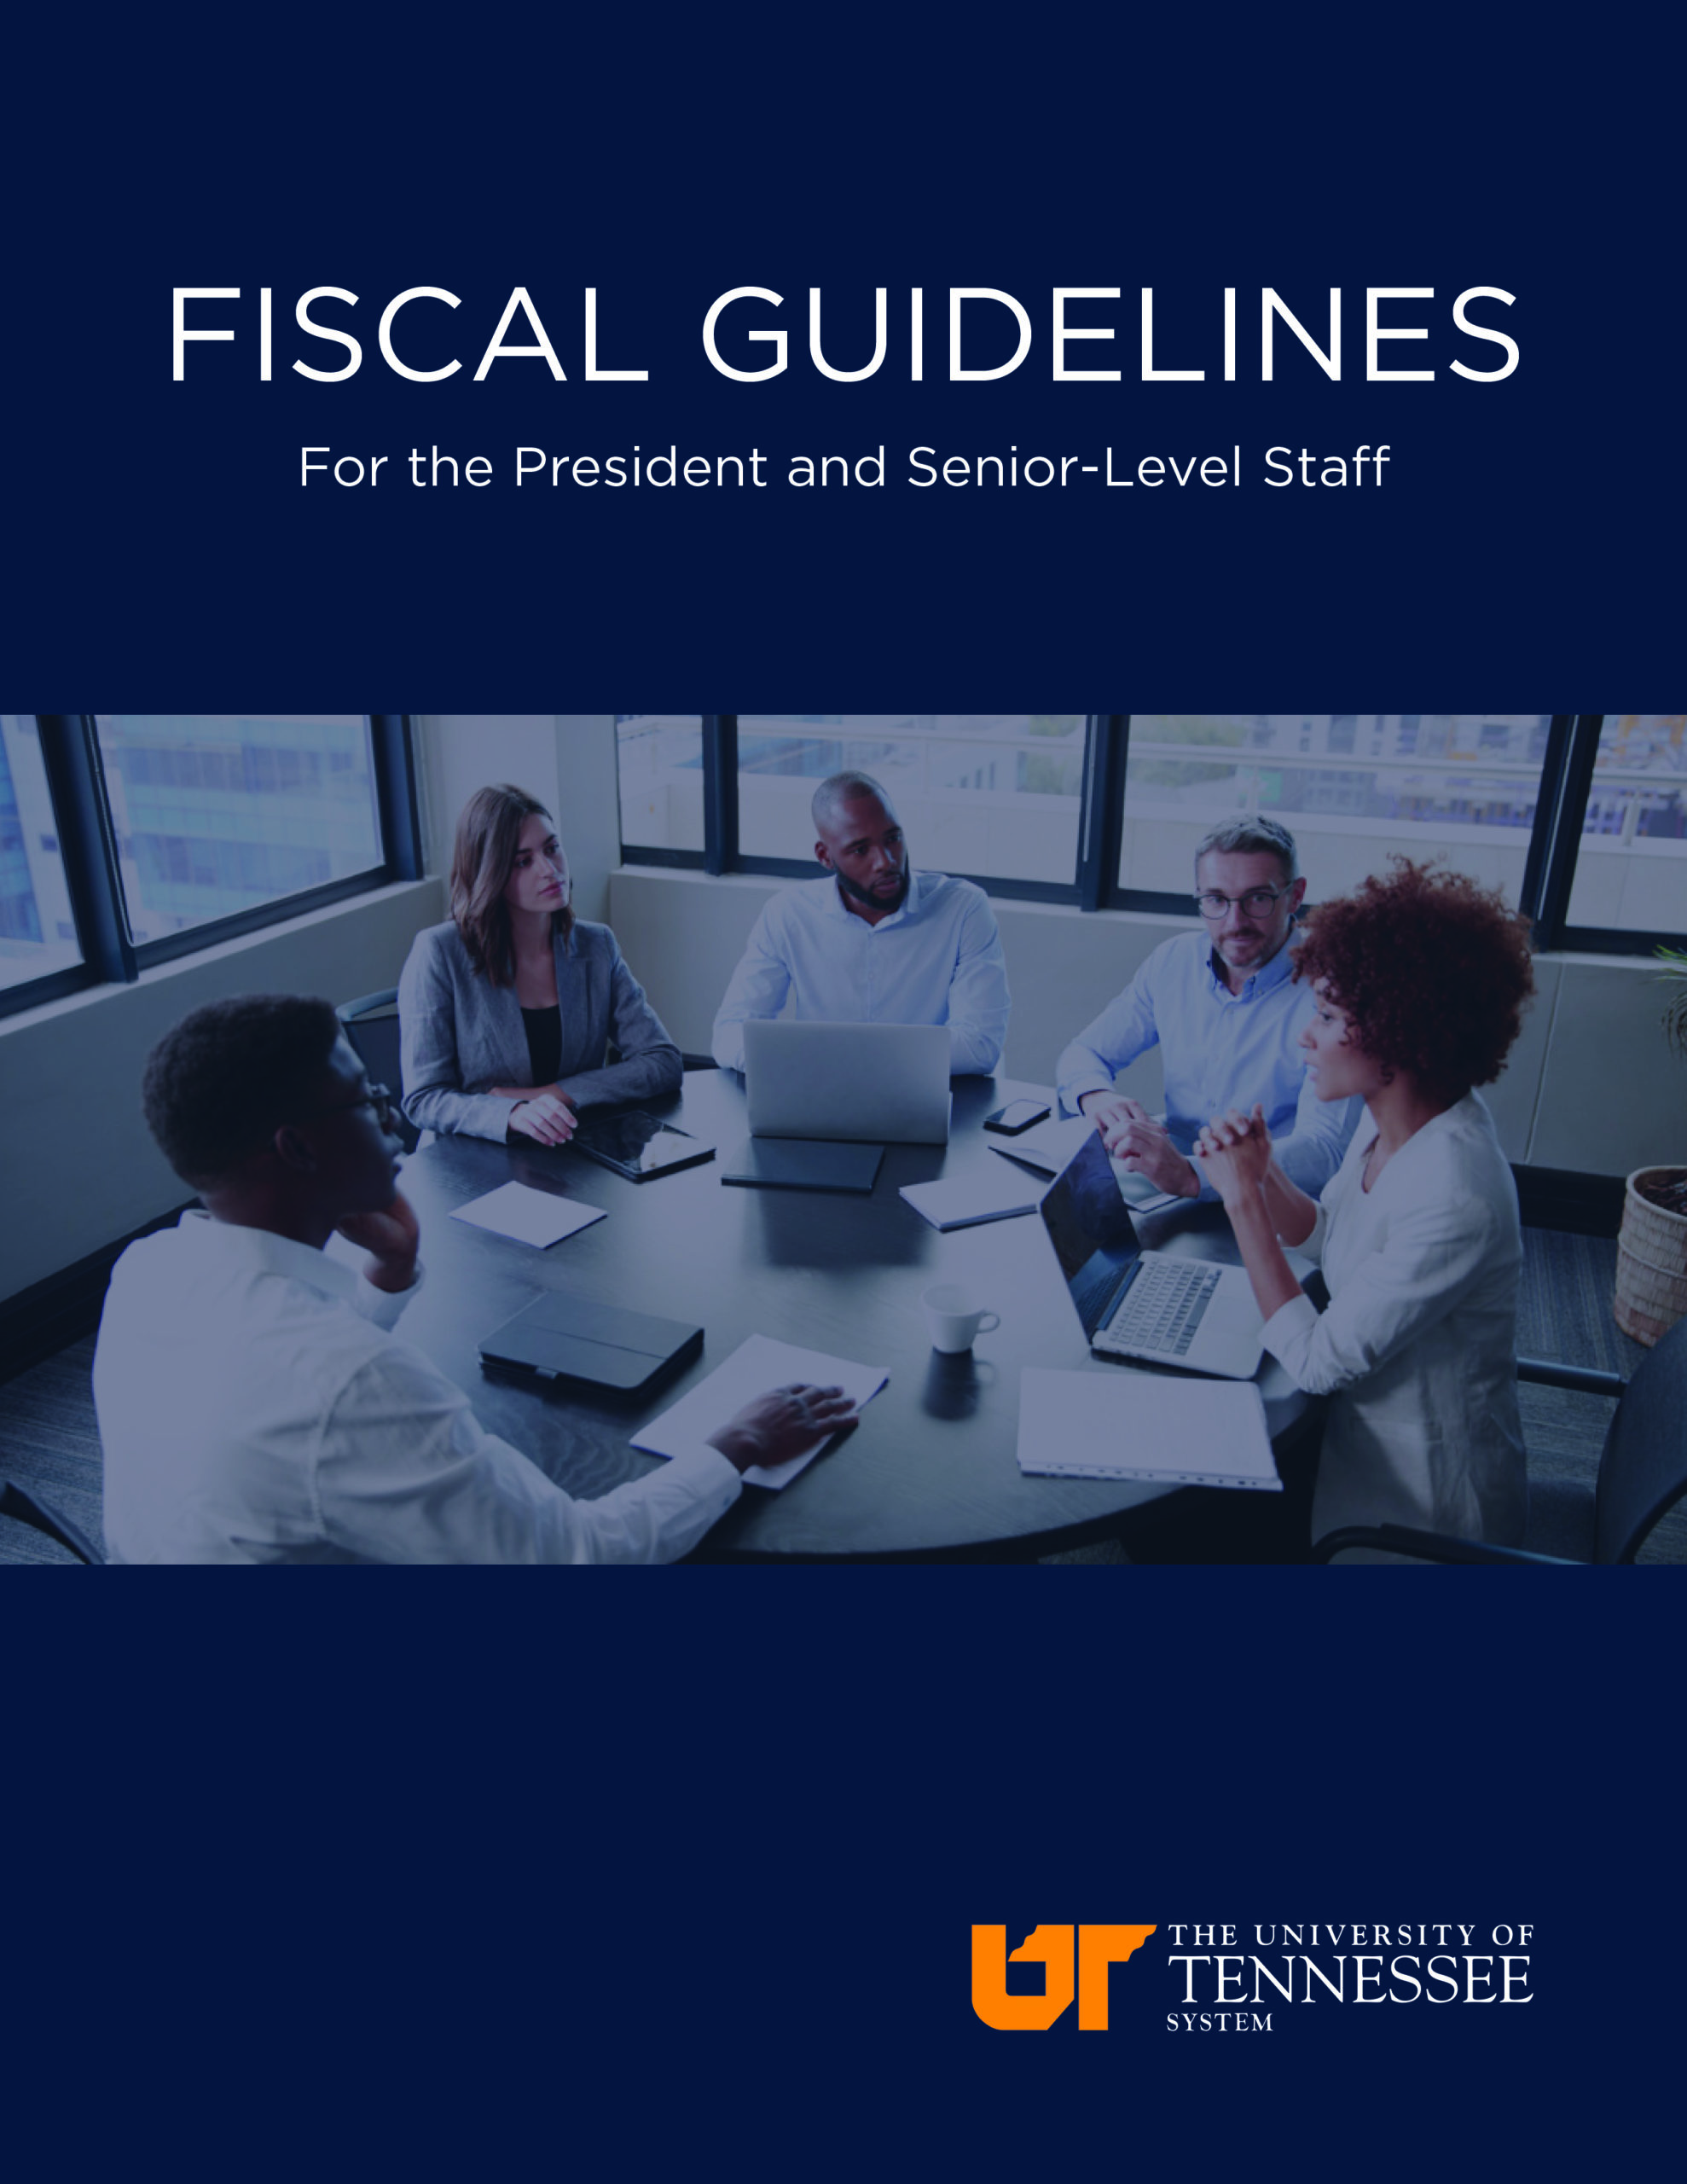 Fiscal Guidelines for the president and senior-level staff